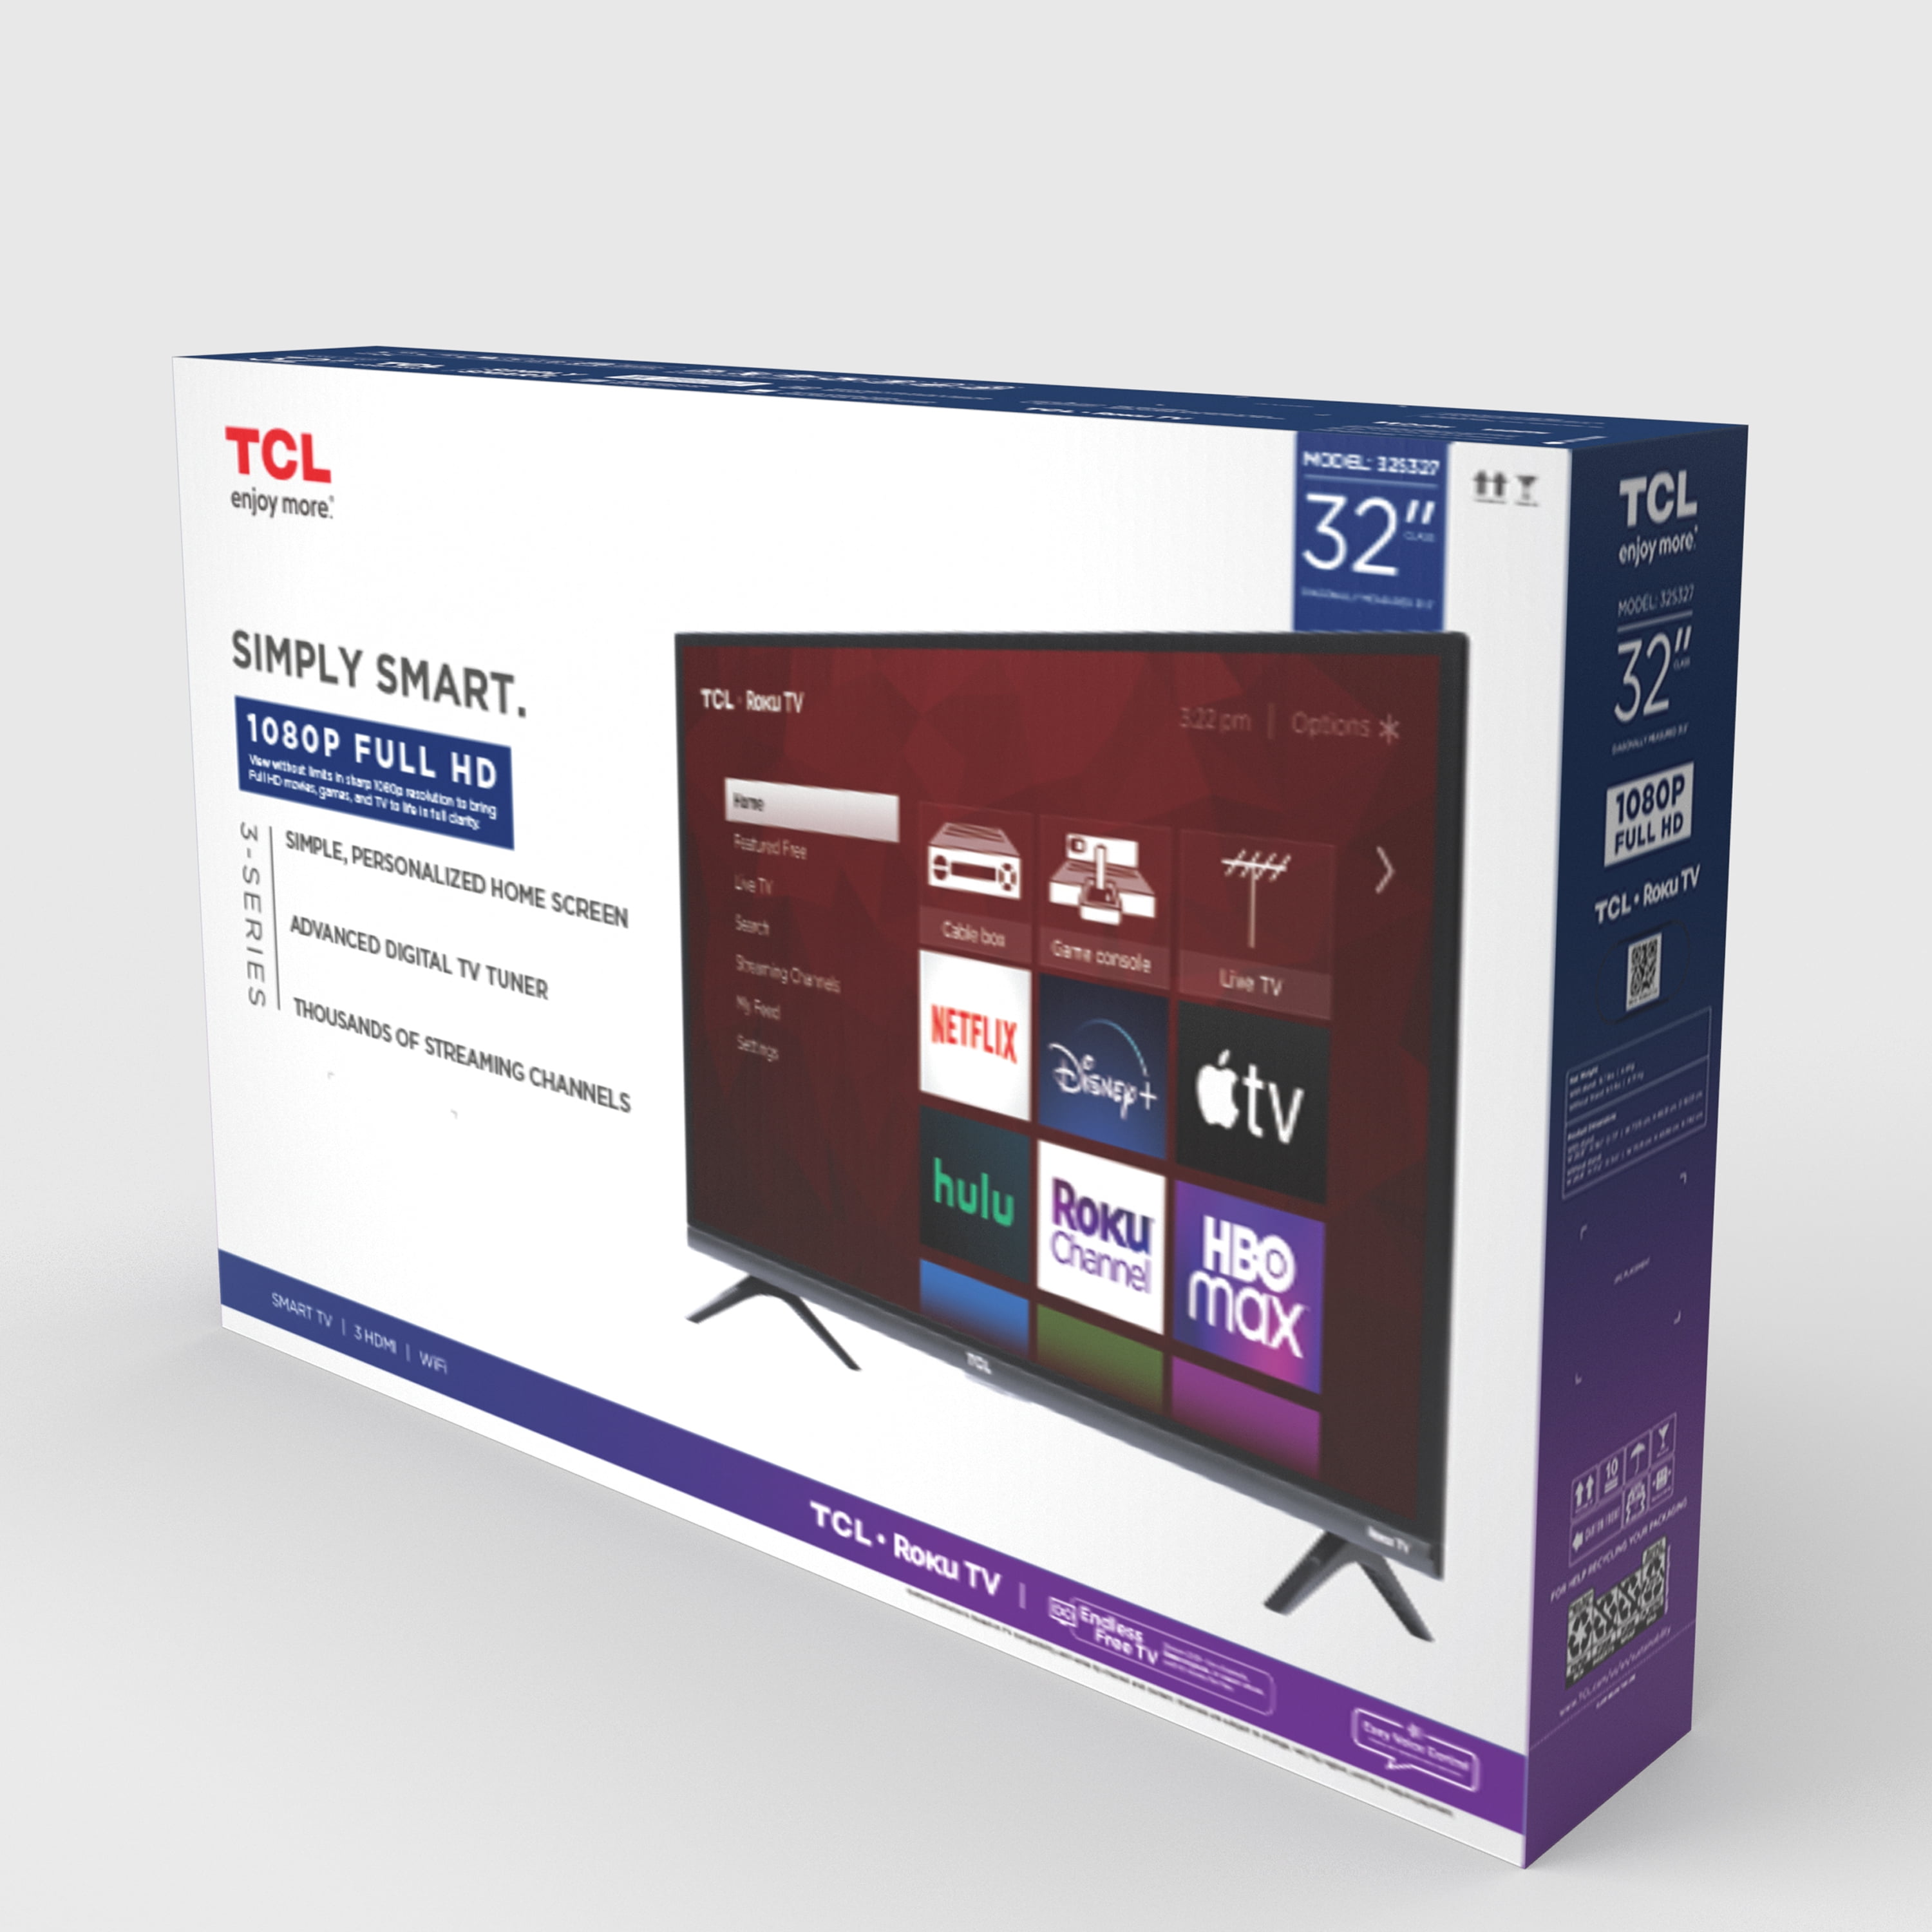 TCL TV 32 SERIE ES5200 DLED HD